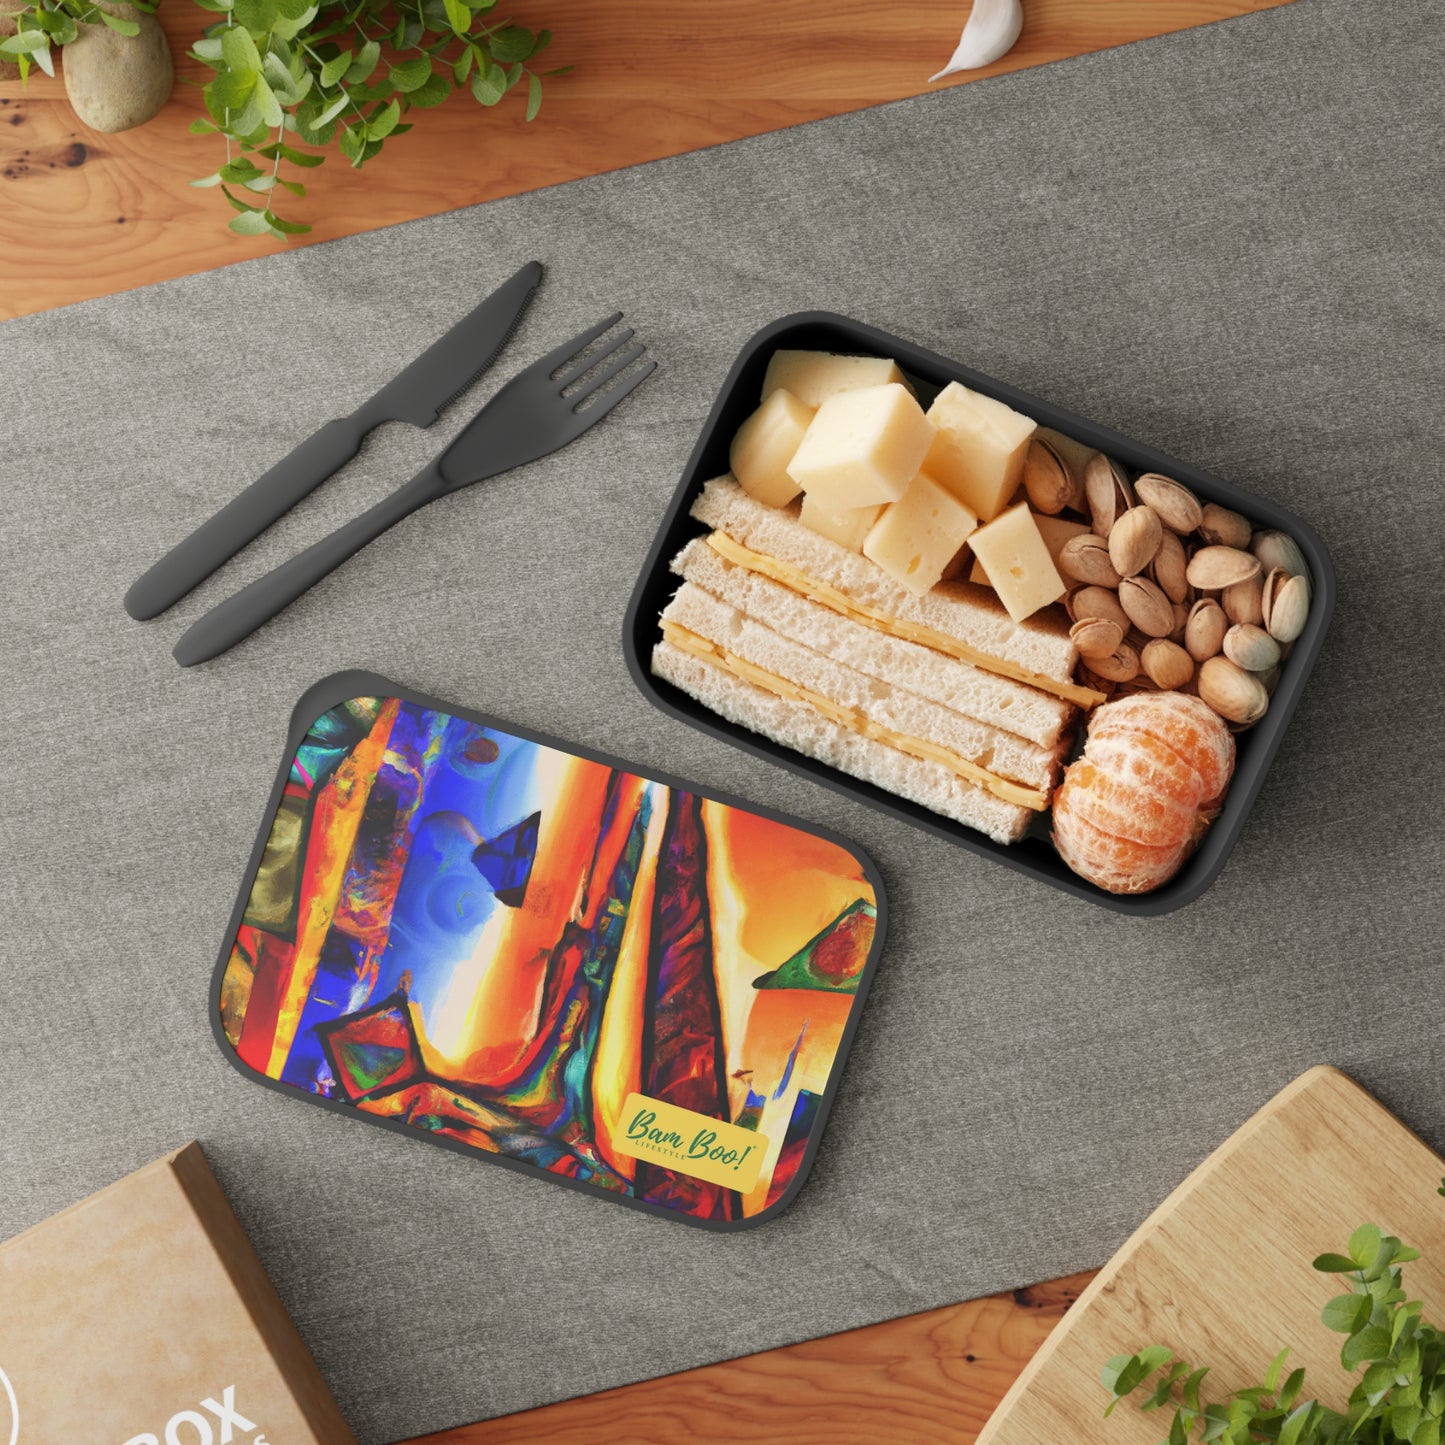 "Explorations in Artistic Hybridization" - Bam Boo! Lifestyle Eco-friendly PLA Bento Box with Band and Utensils